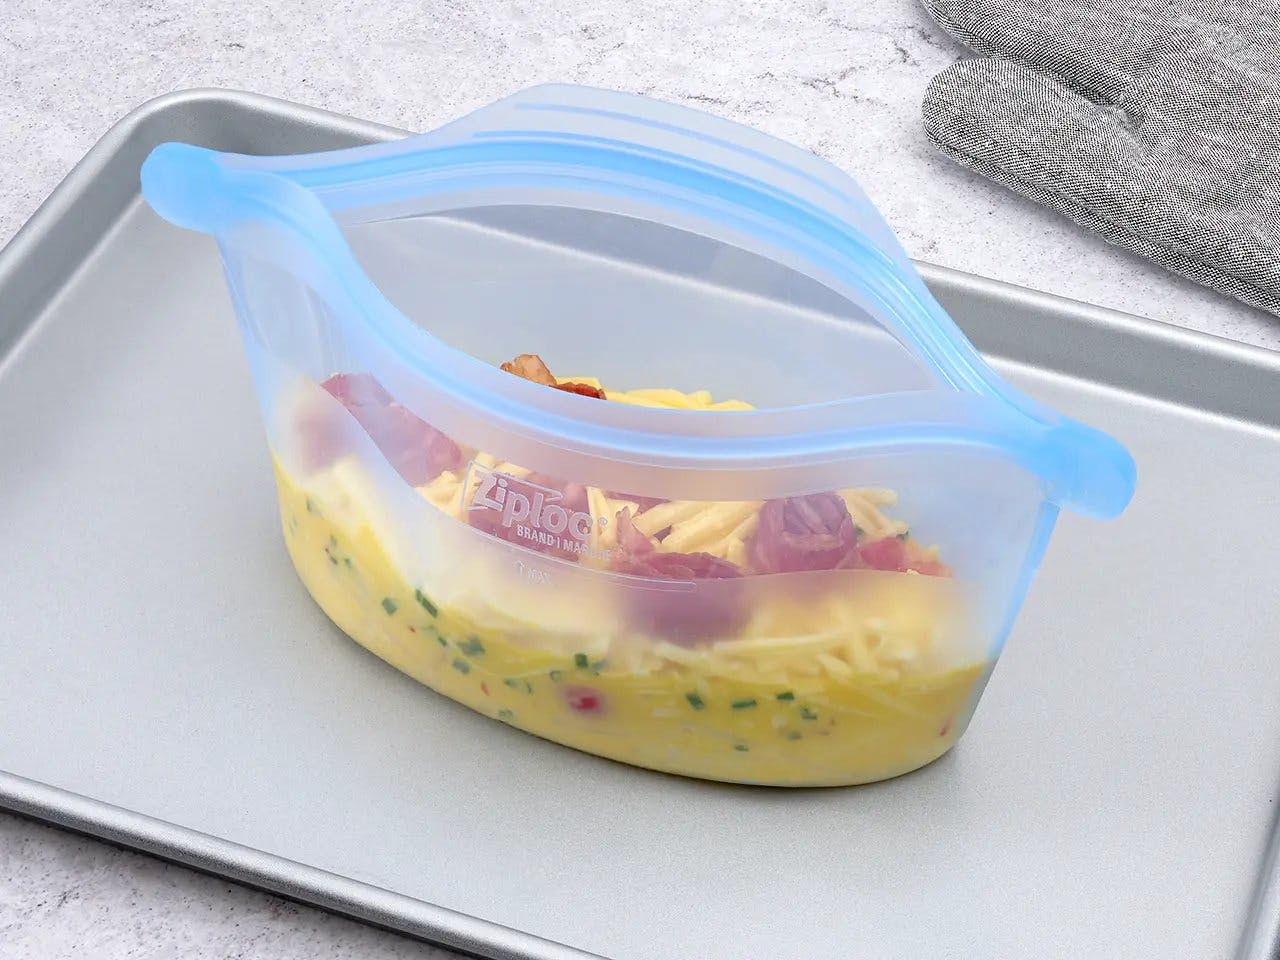 Ziploc Endurables container with potatoes, red pepper, chives, and cheese on baking sheet.